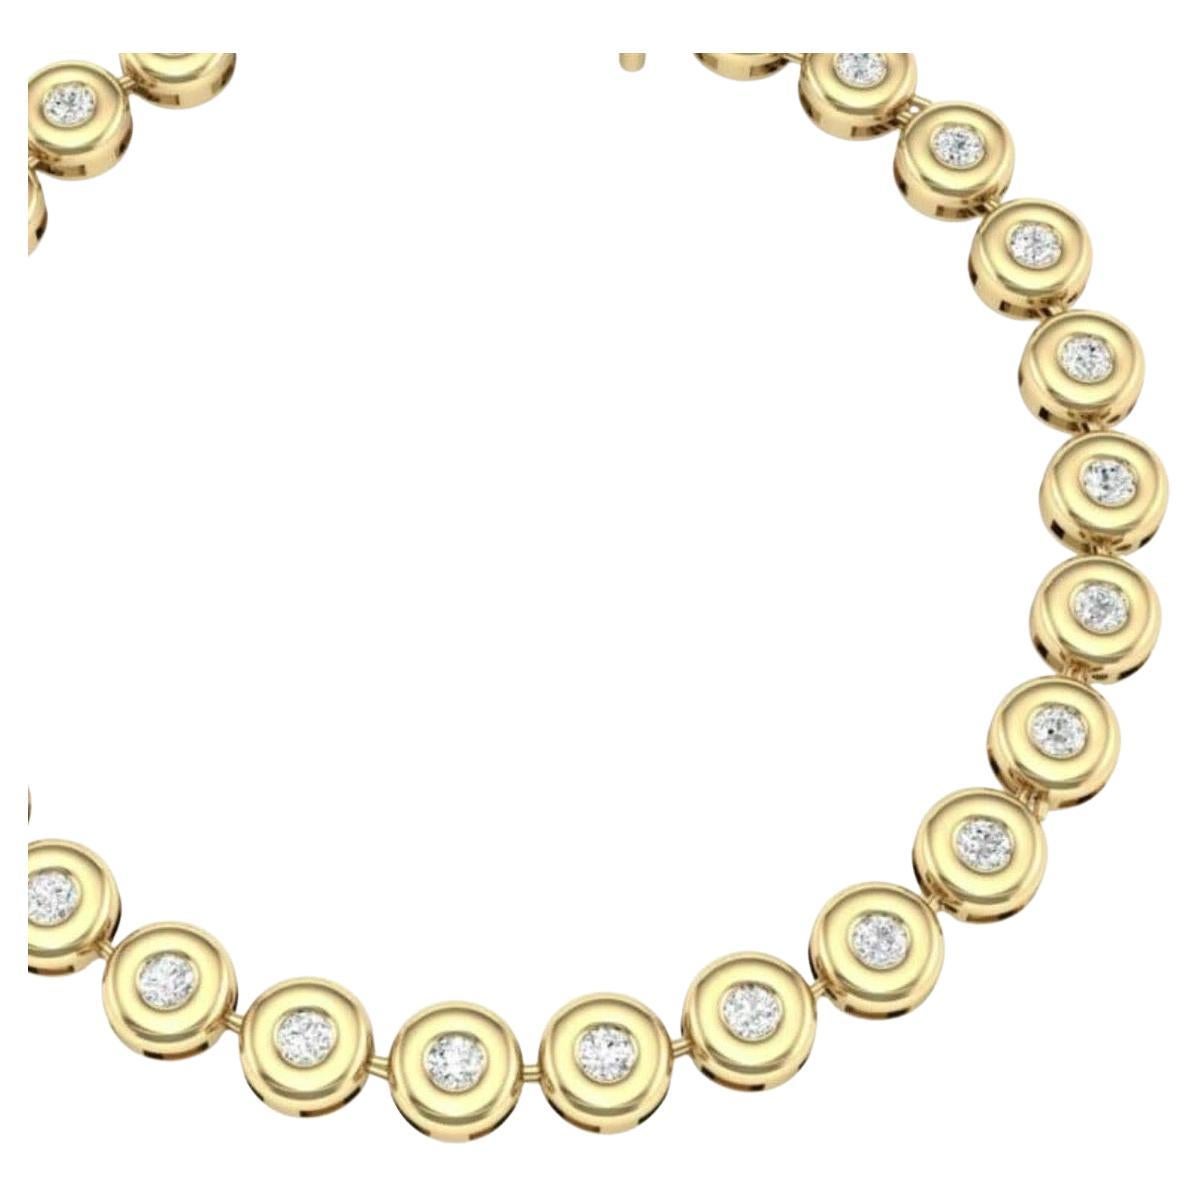 Round 6 Pointer, 4.5Ct Diamond Tennis Necklace 18Karat Yellow Gold 52 Gm, Unisex, 17 Inch long 
each diamond is set in a gold bezel
Simple. Sexy. Timeless. A diamond tennis necklace is the ultimate must-have for every jewelry collection. Similar to